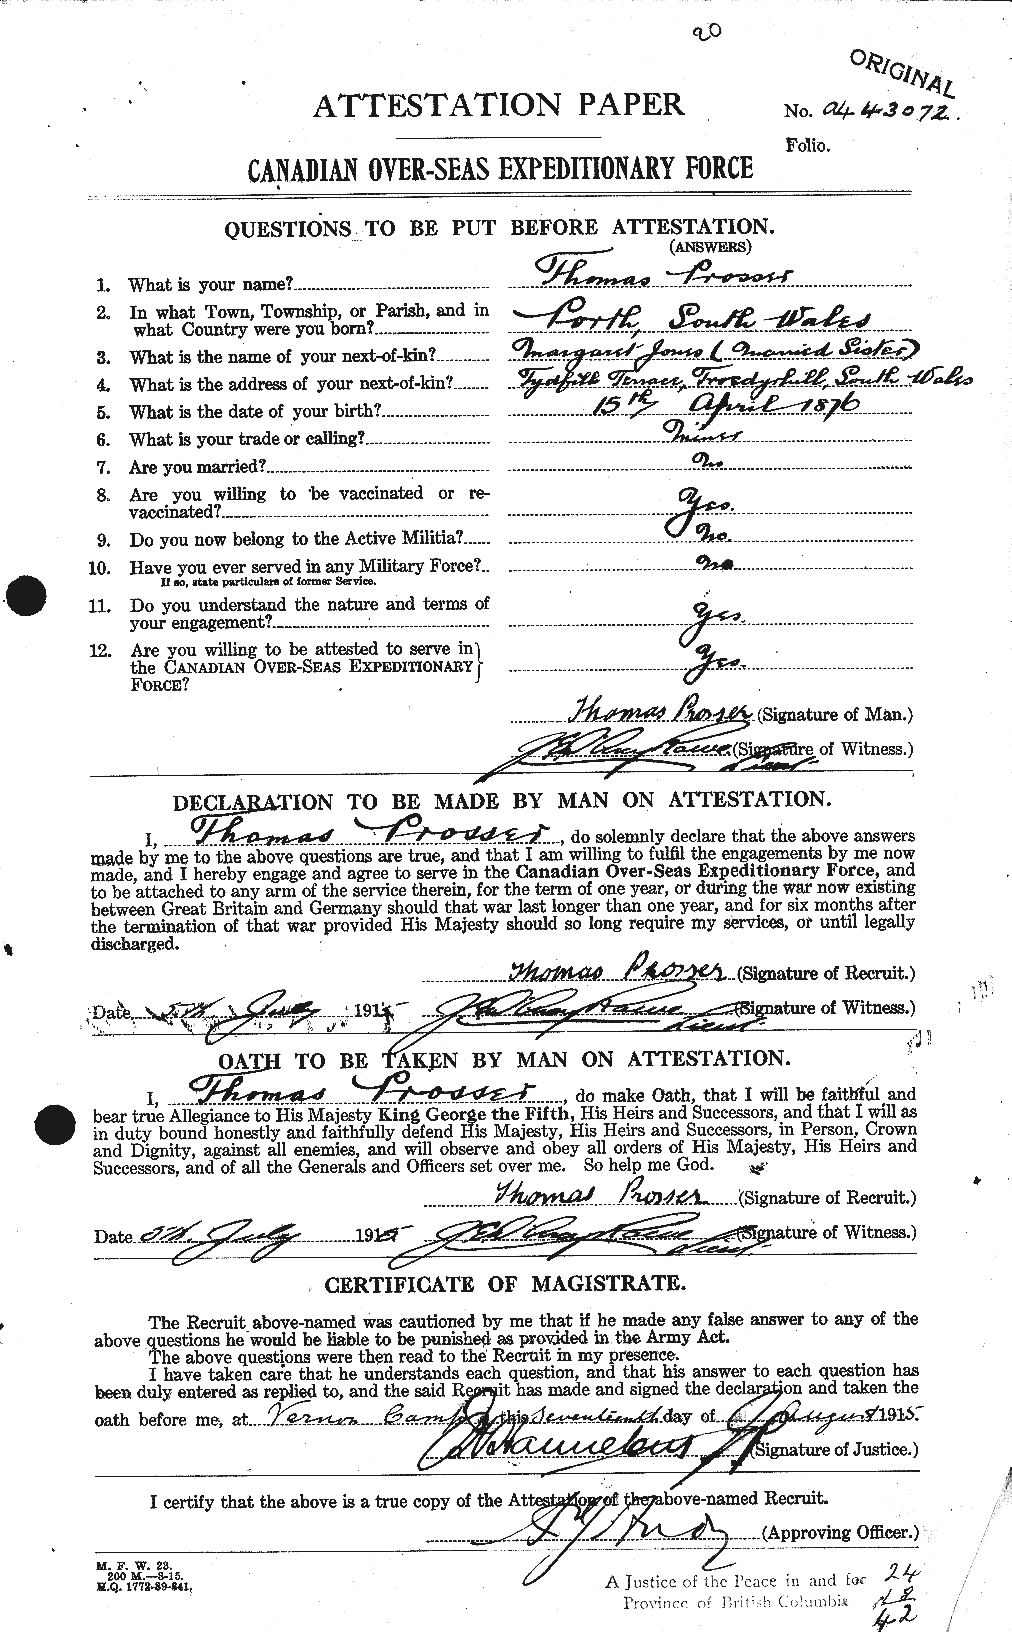 Personnel Records of the First World War - CEF 591391a